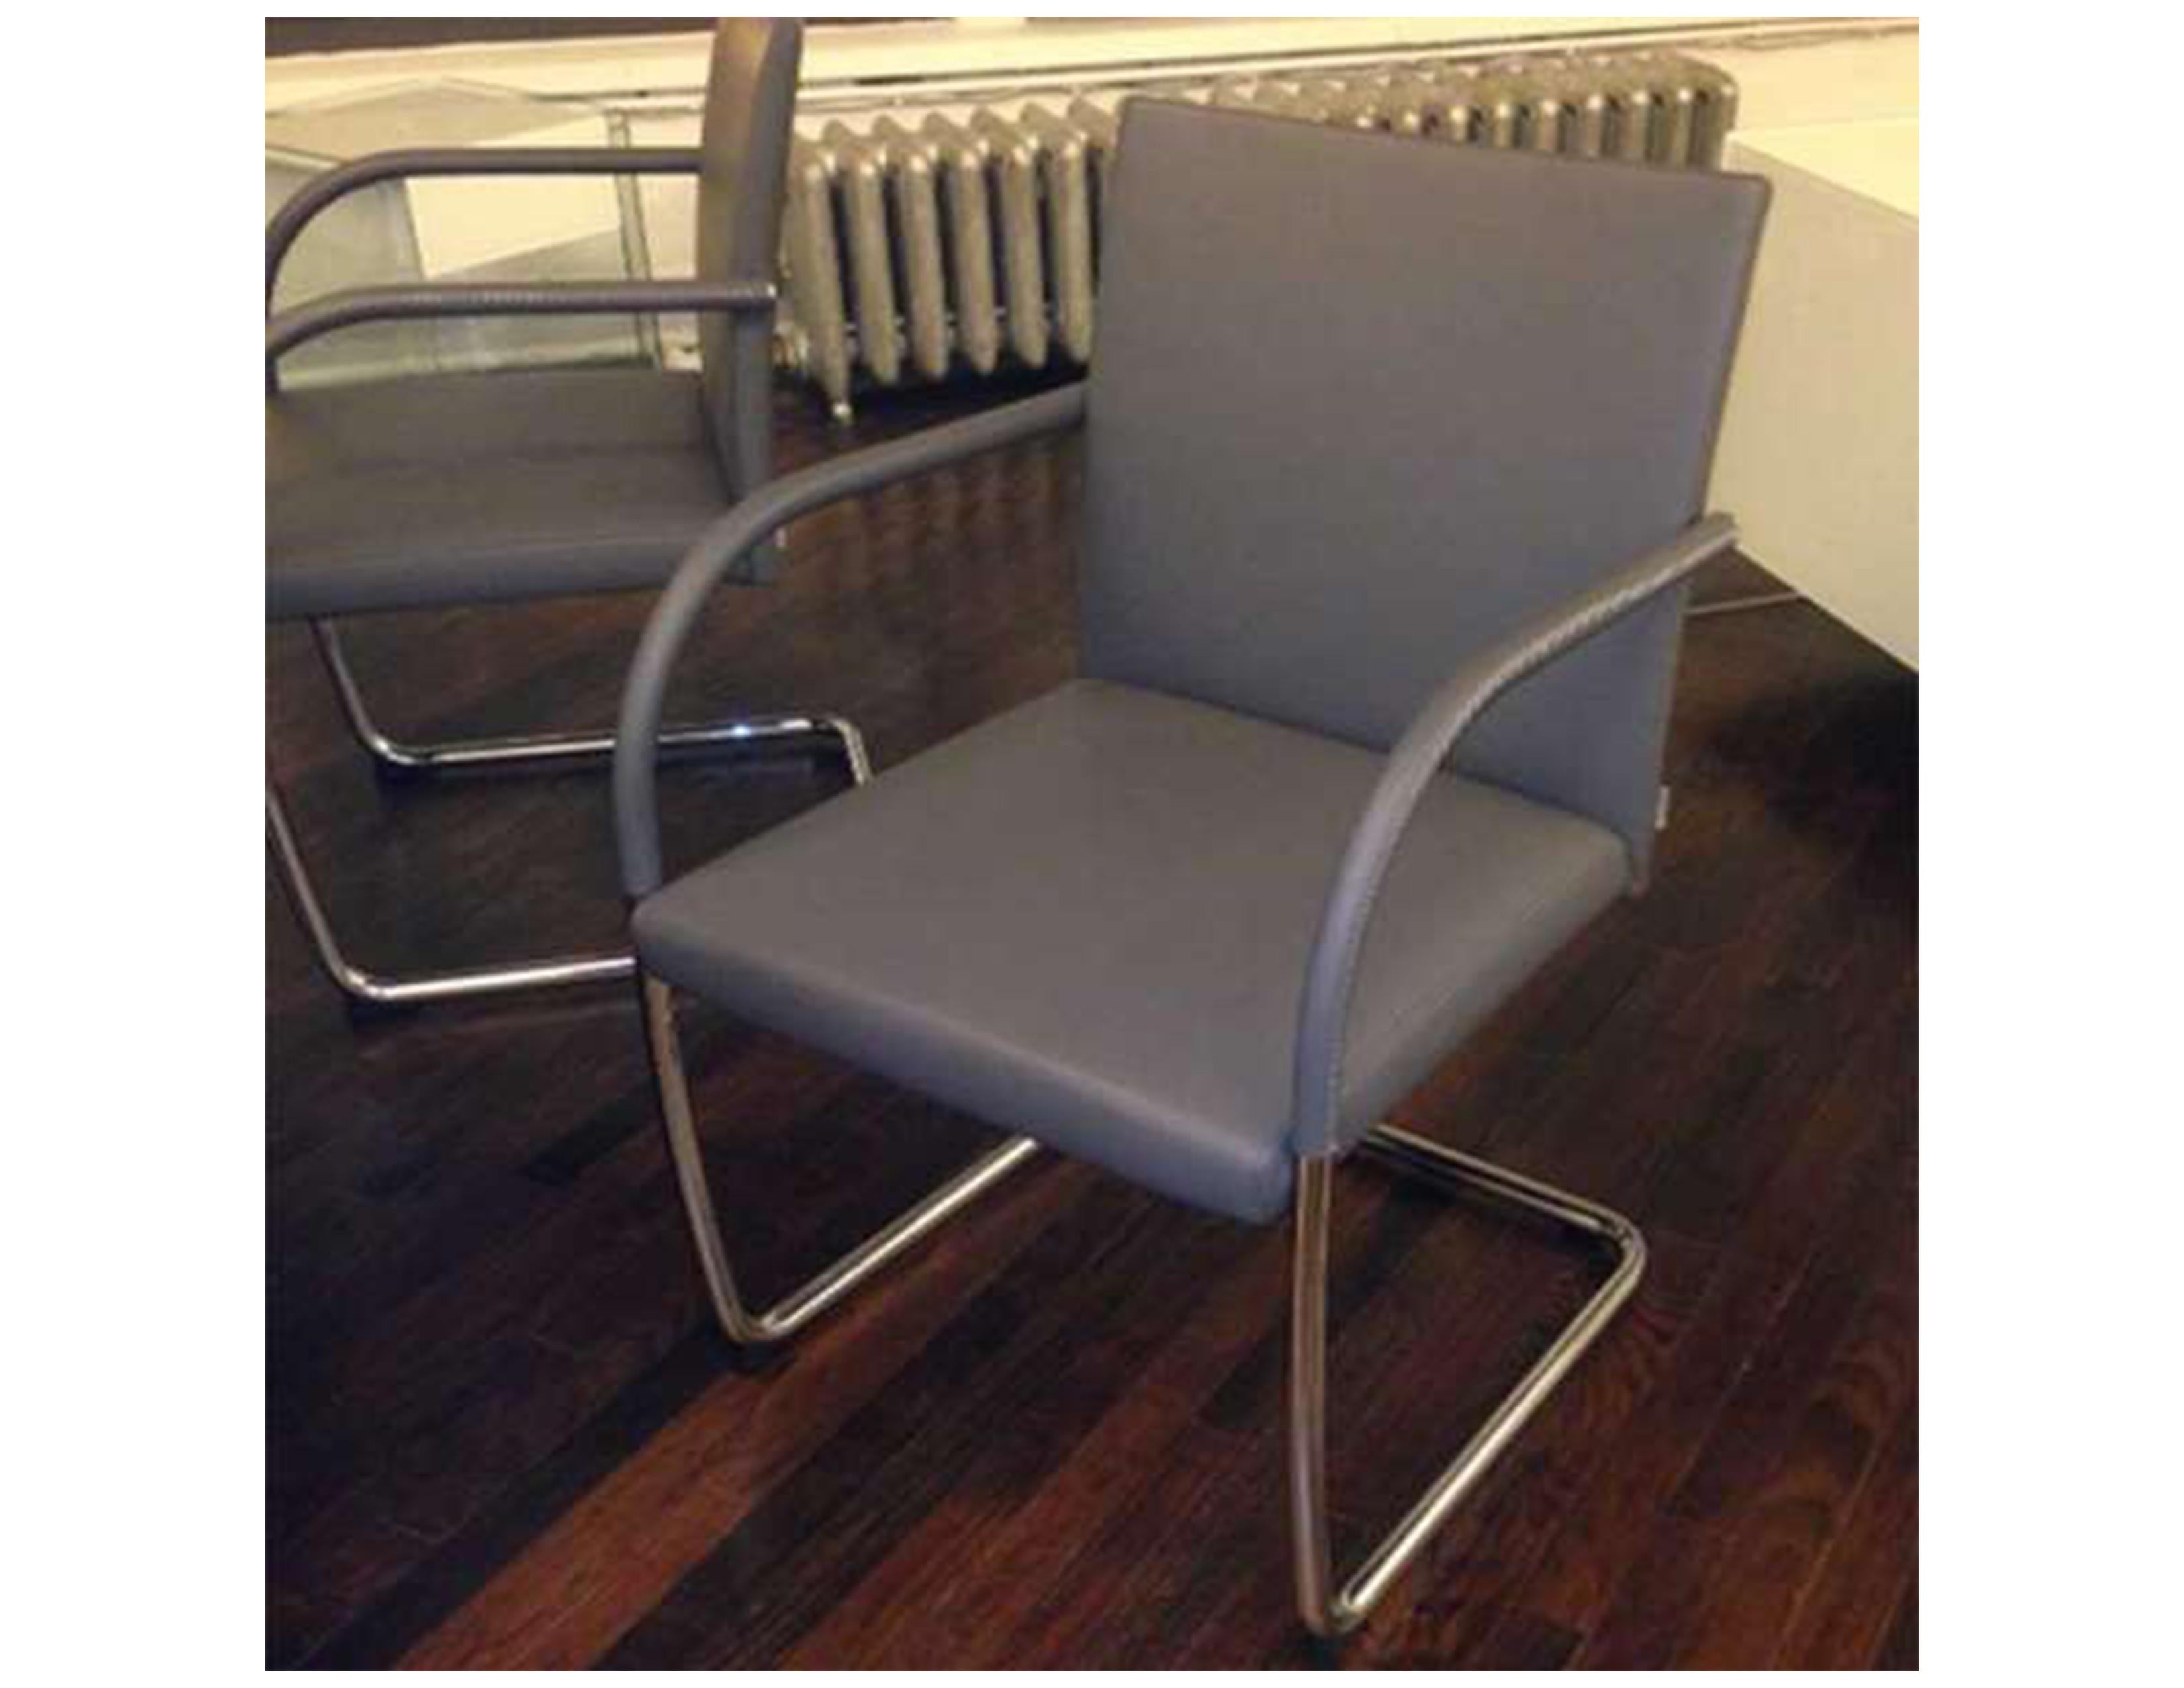 (2) George armchairs
 Leather covered armrests
Model# 1562
Grey leather
Cantilever base
Original price: 2,073.00 ea.